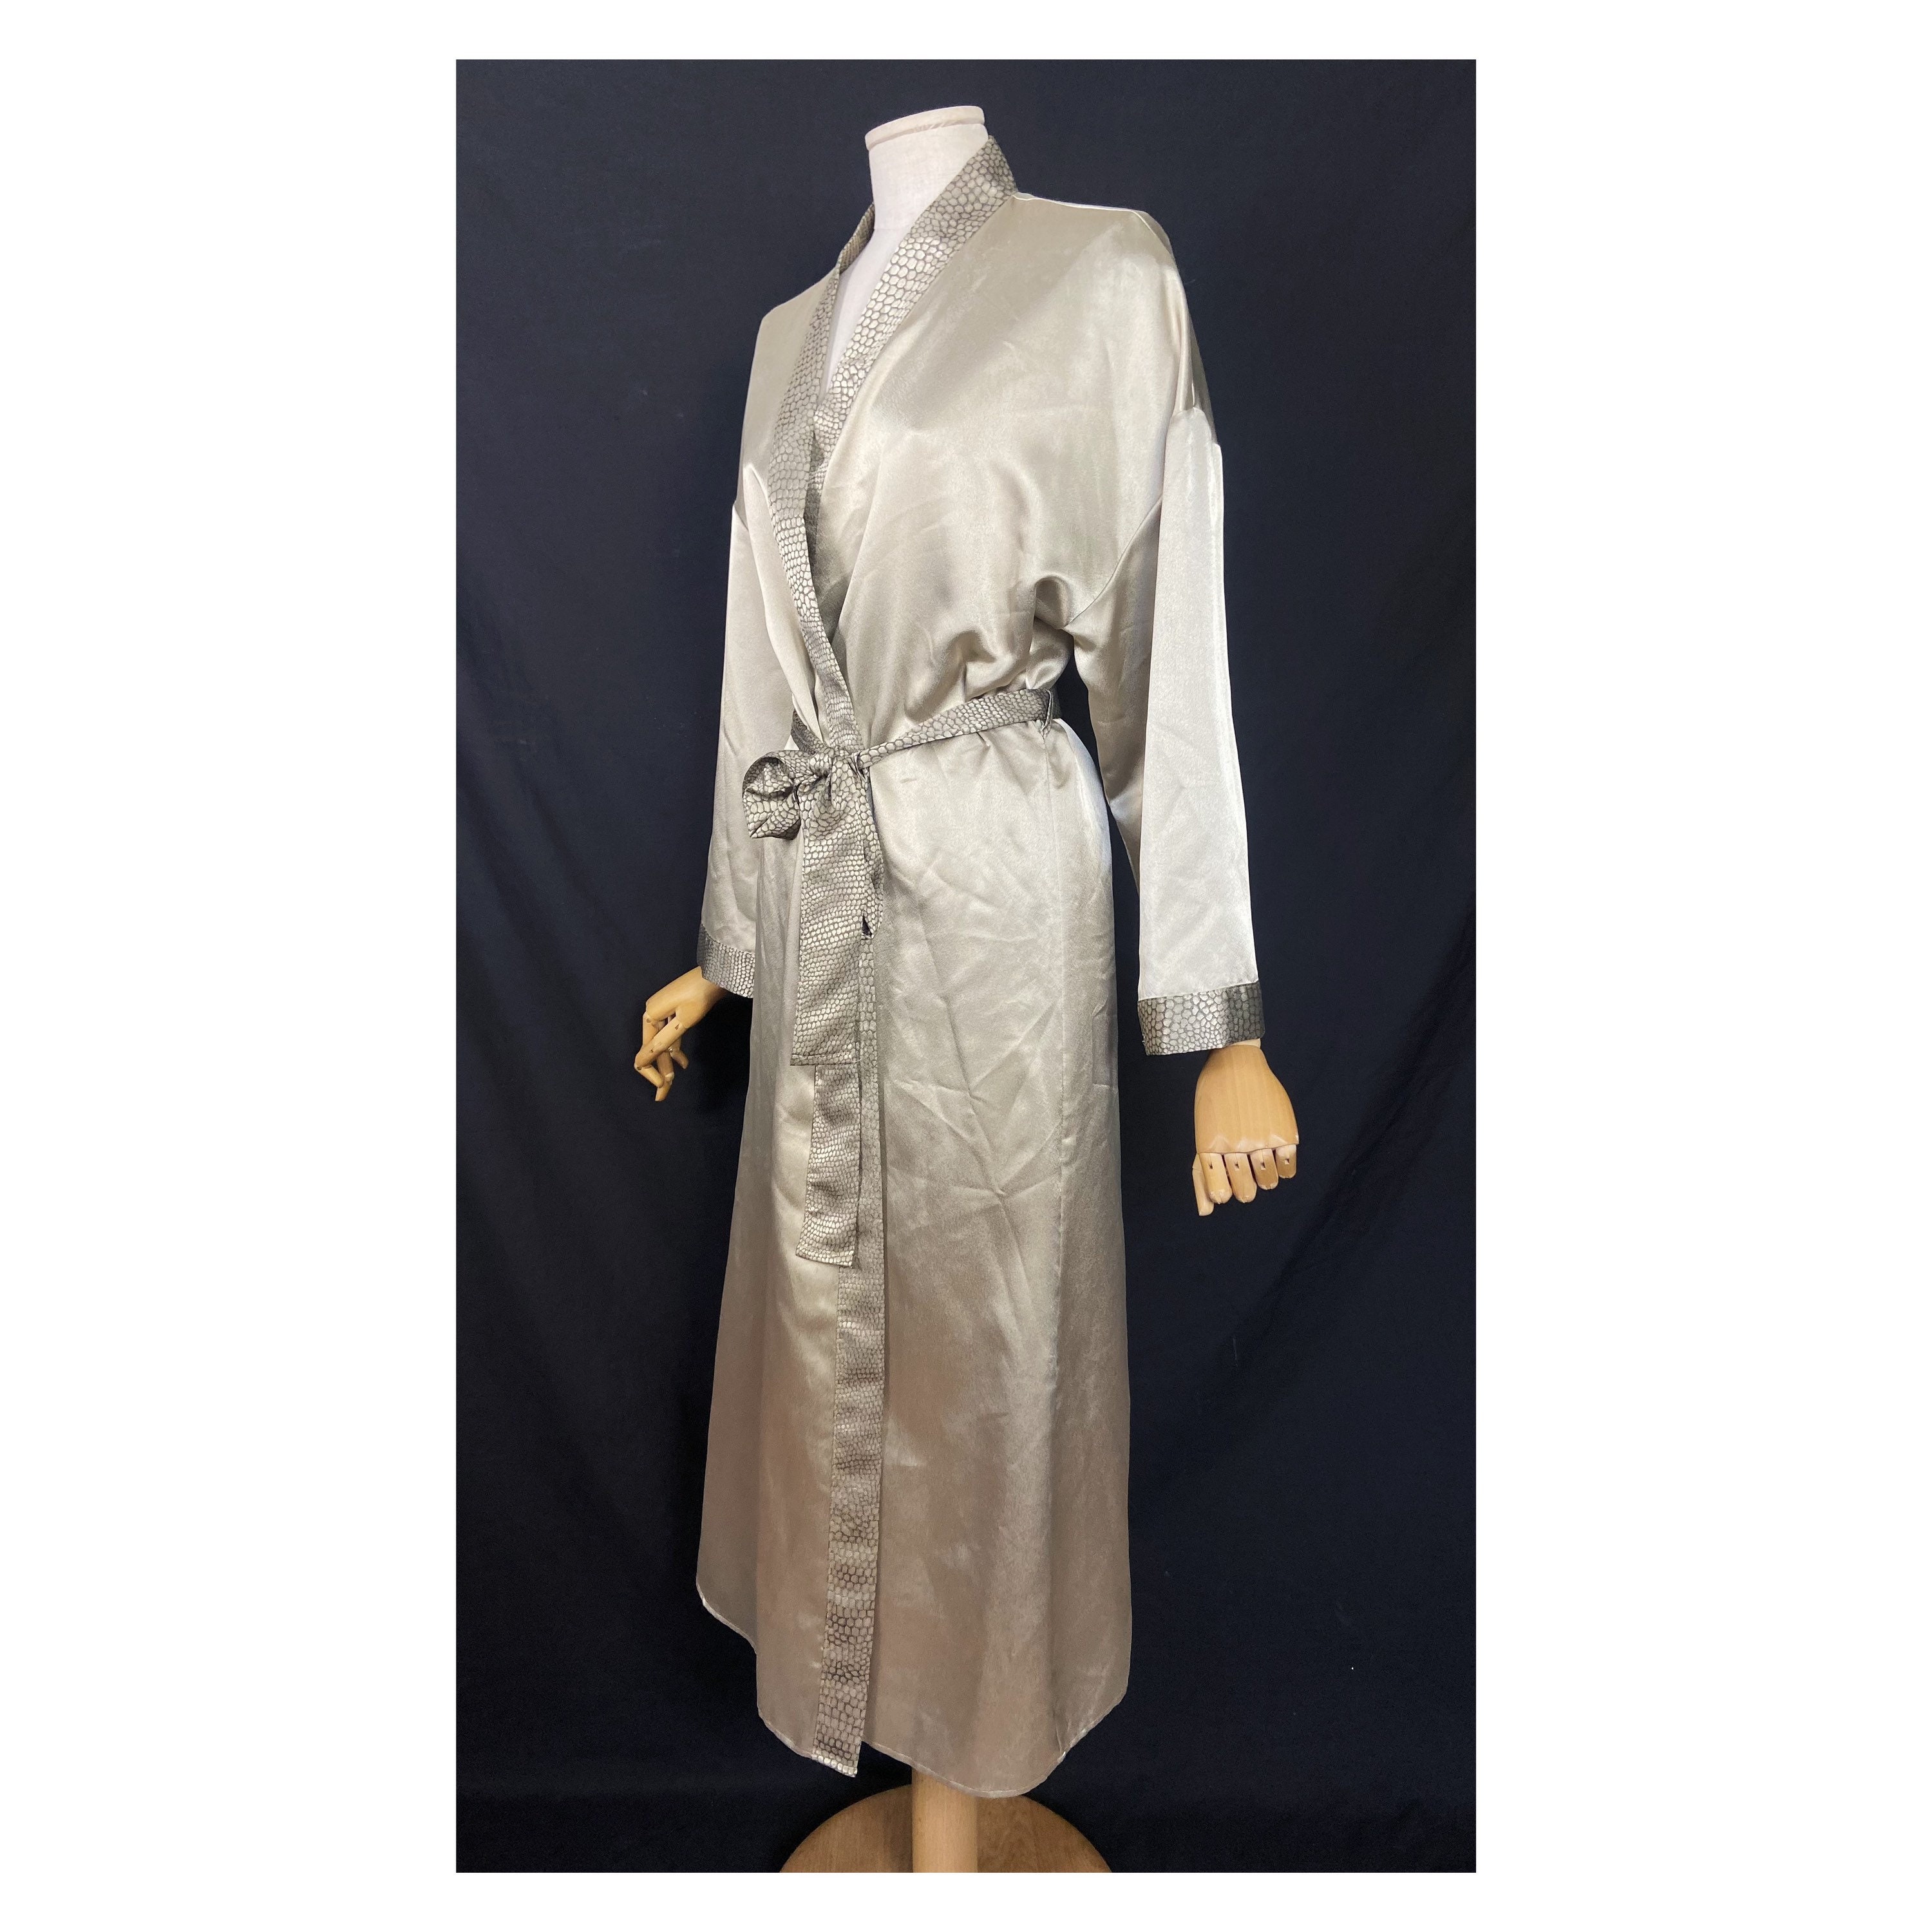 Women's Soft Long Satin Robes Open Front Lace-Up Silk Robes Kimonos Silky  Bathrobes Sheer Lace Sleeve Dressing Gowns at Amazon Women's Clothing store